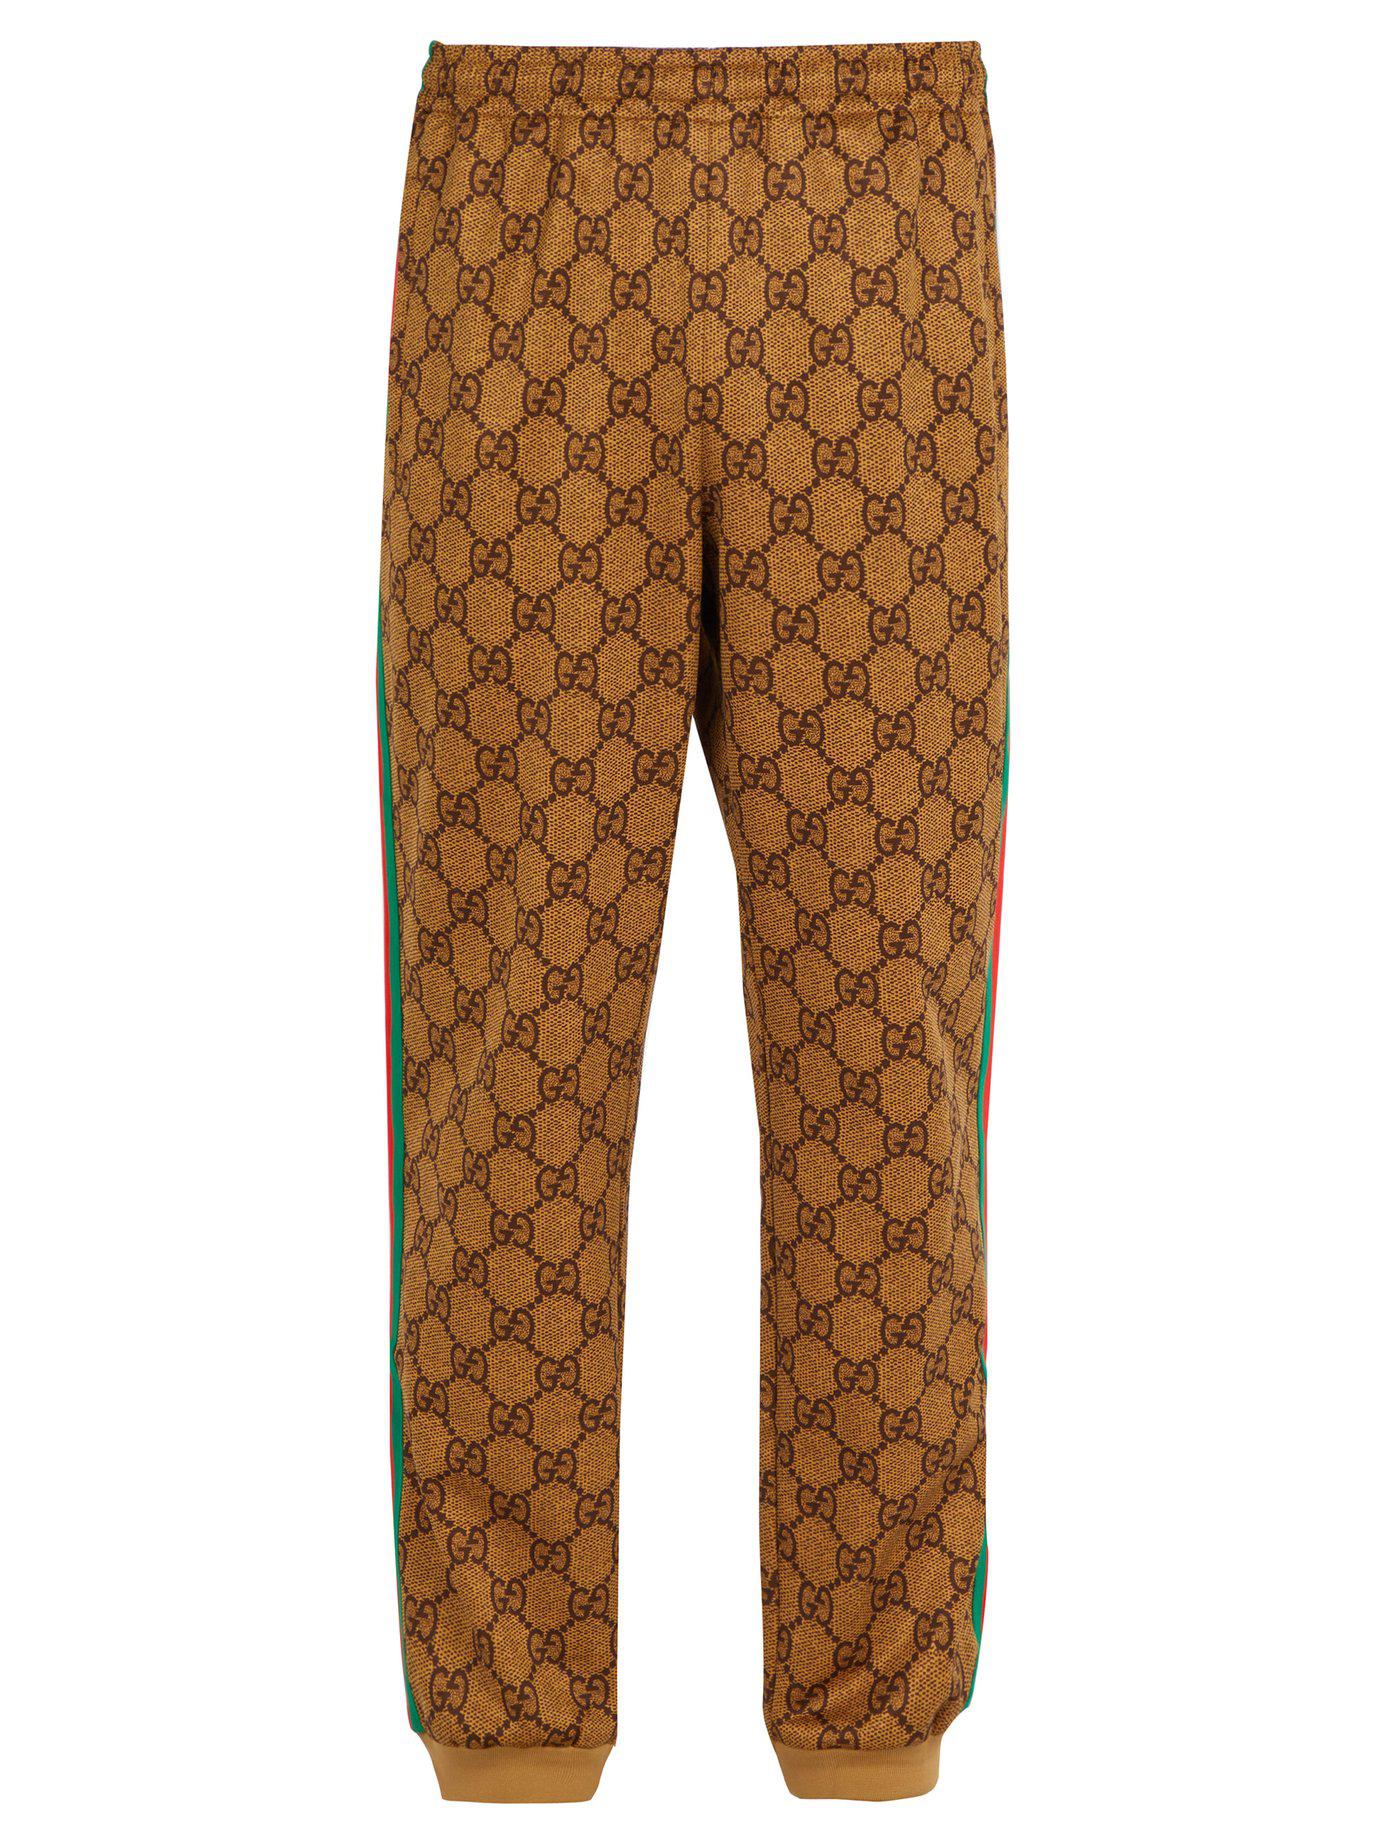 Gucci GG Supreme Print Cotton Blend Sweat Pants in Brown for Men